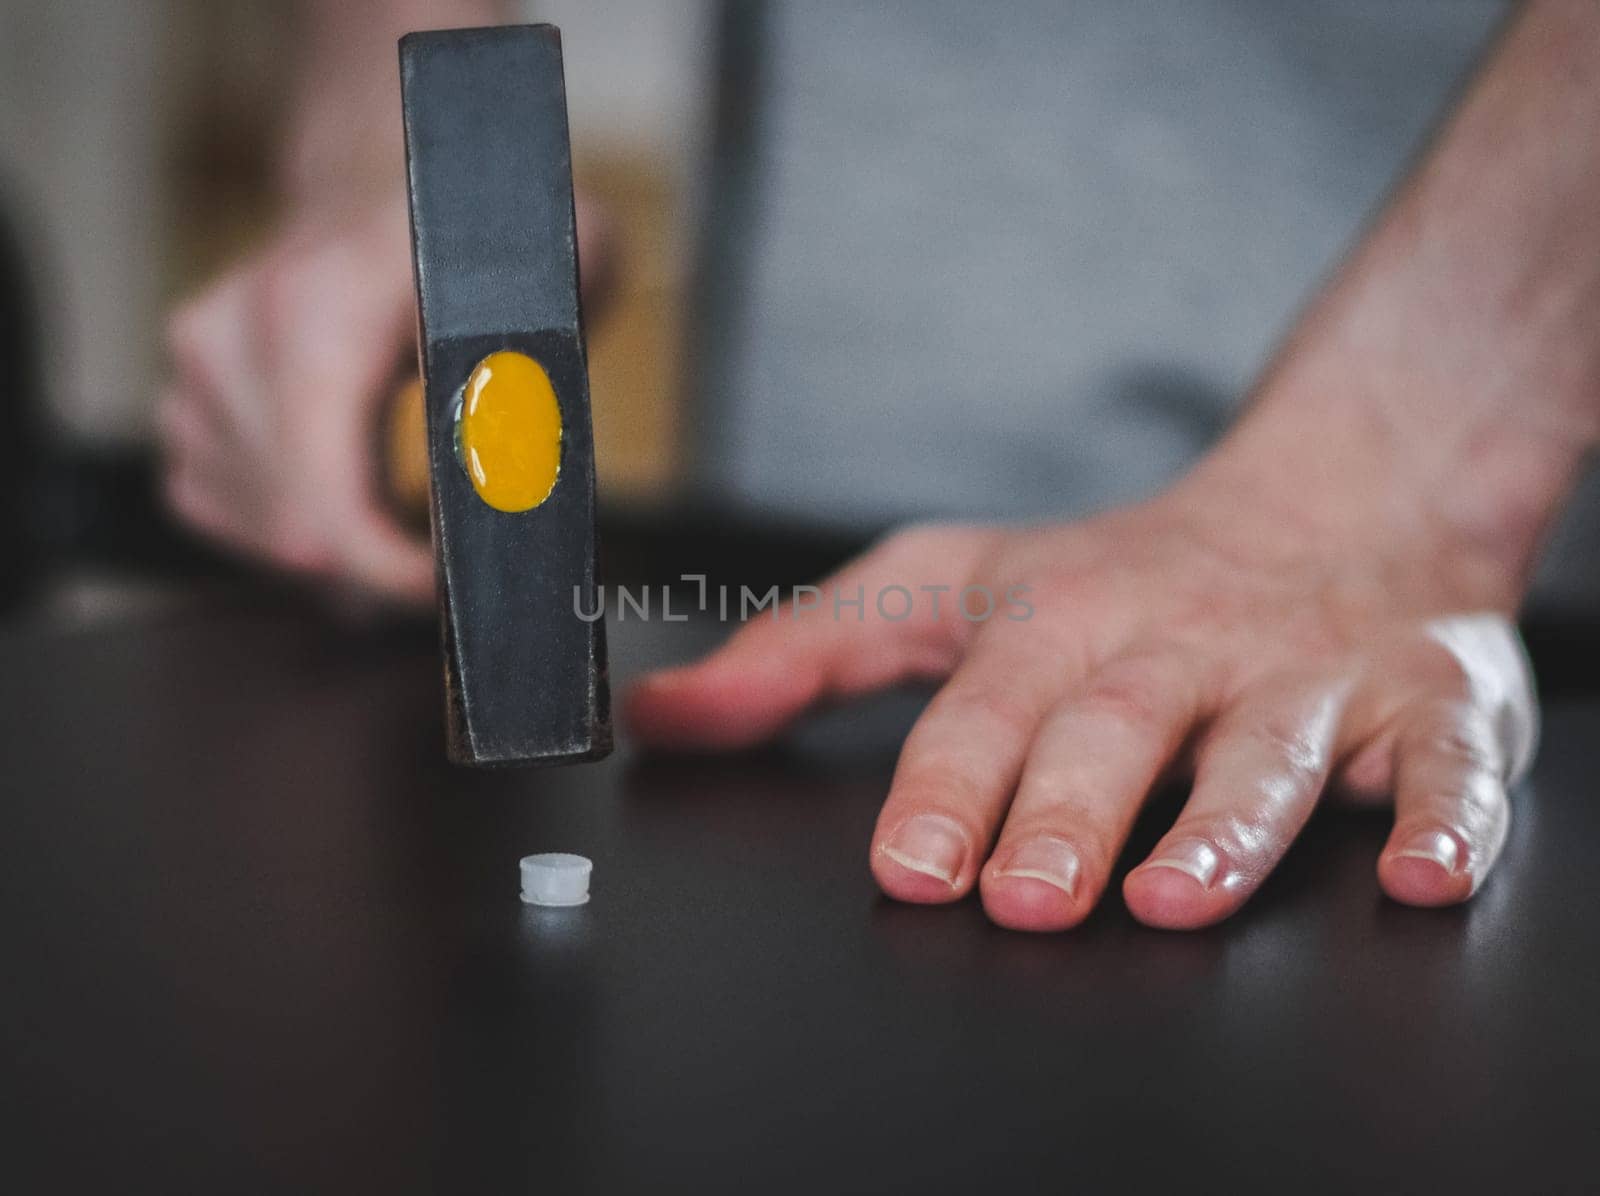 Caucasian young unrecognizable man hammers a white plastic dowel into a black table shelf using a hammer while sitting on the floor in a room, close-up side view with depth of field. Furniture assembly concept, assembly services.